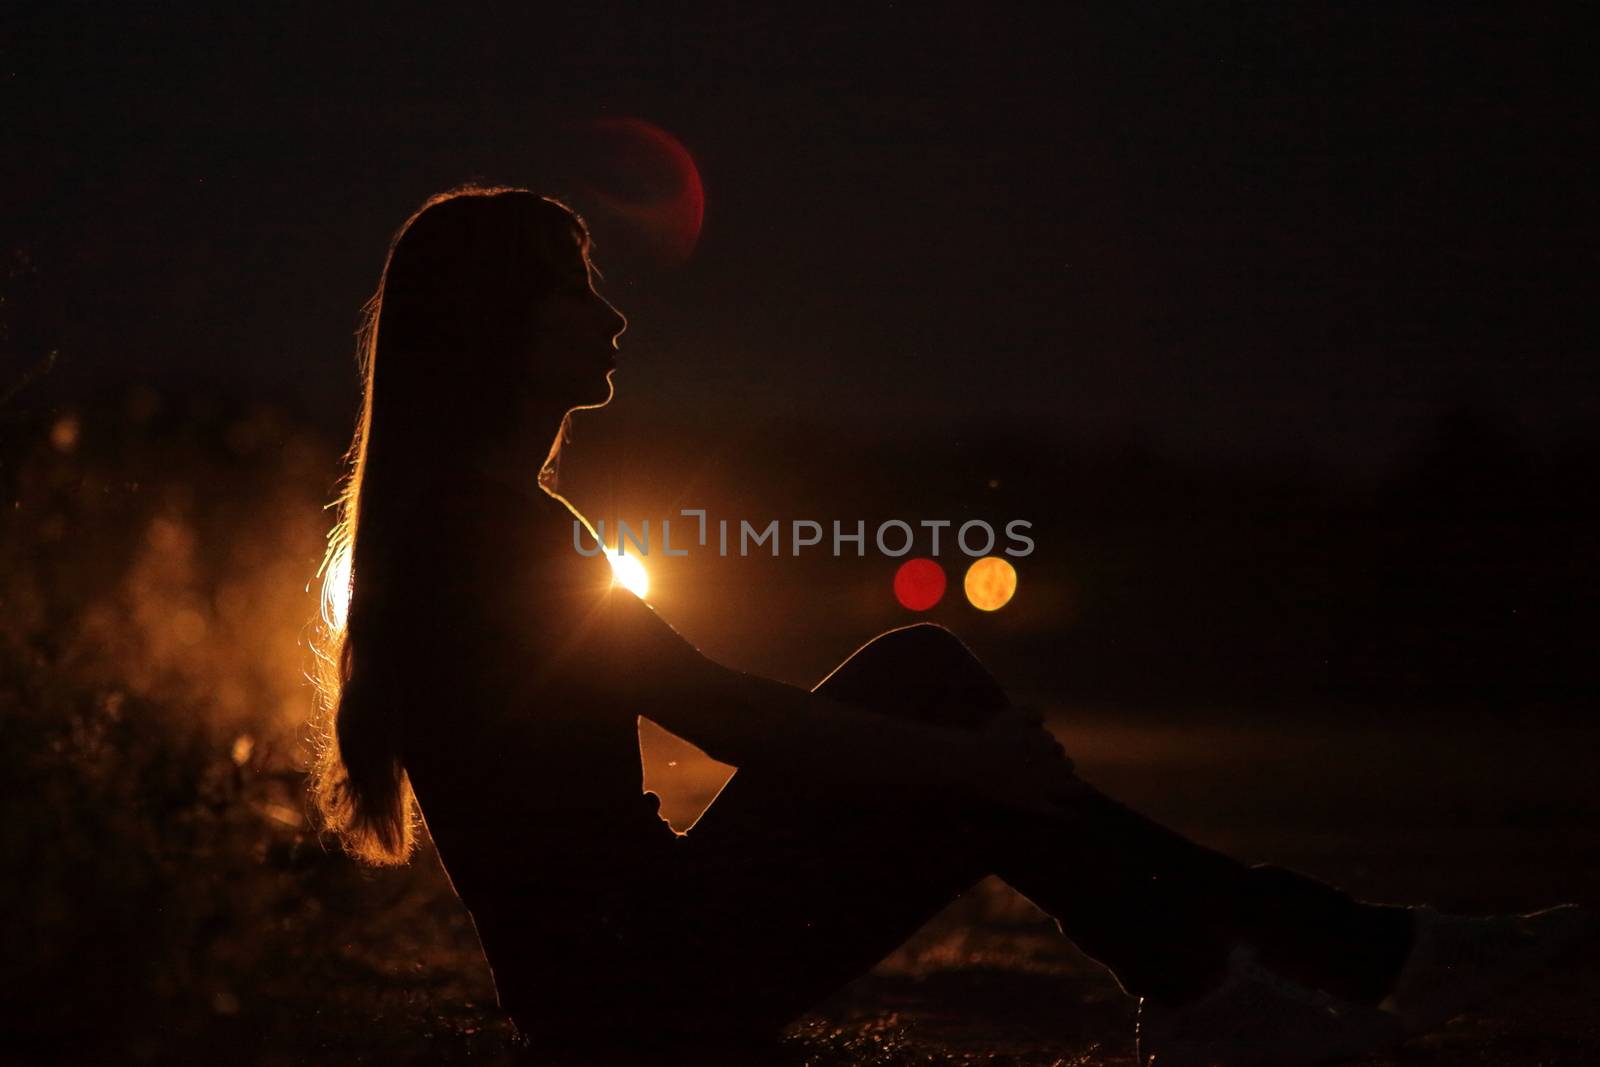 Silhouette of young slender woman in the backlight of car headlights on the auto road at night. The girl is hitchhiking.